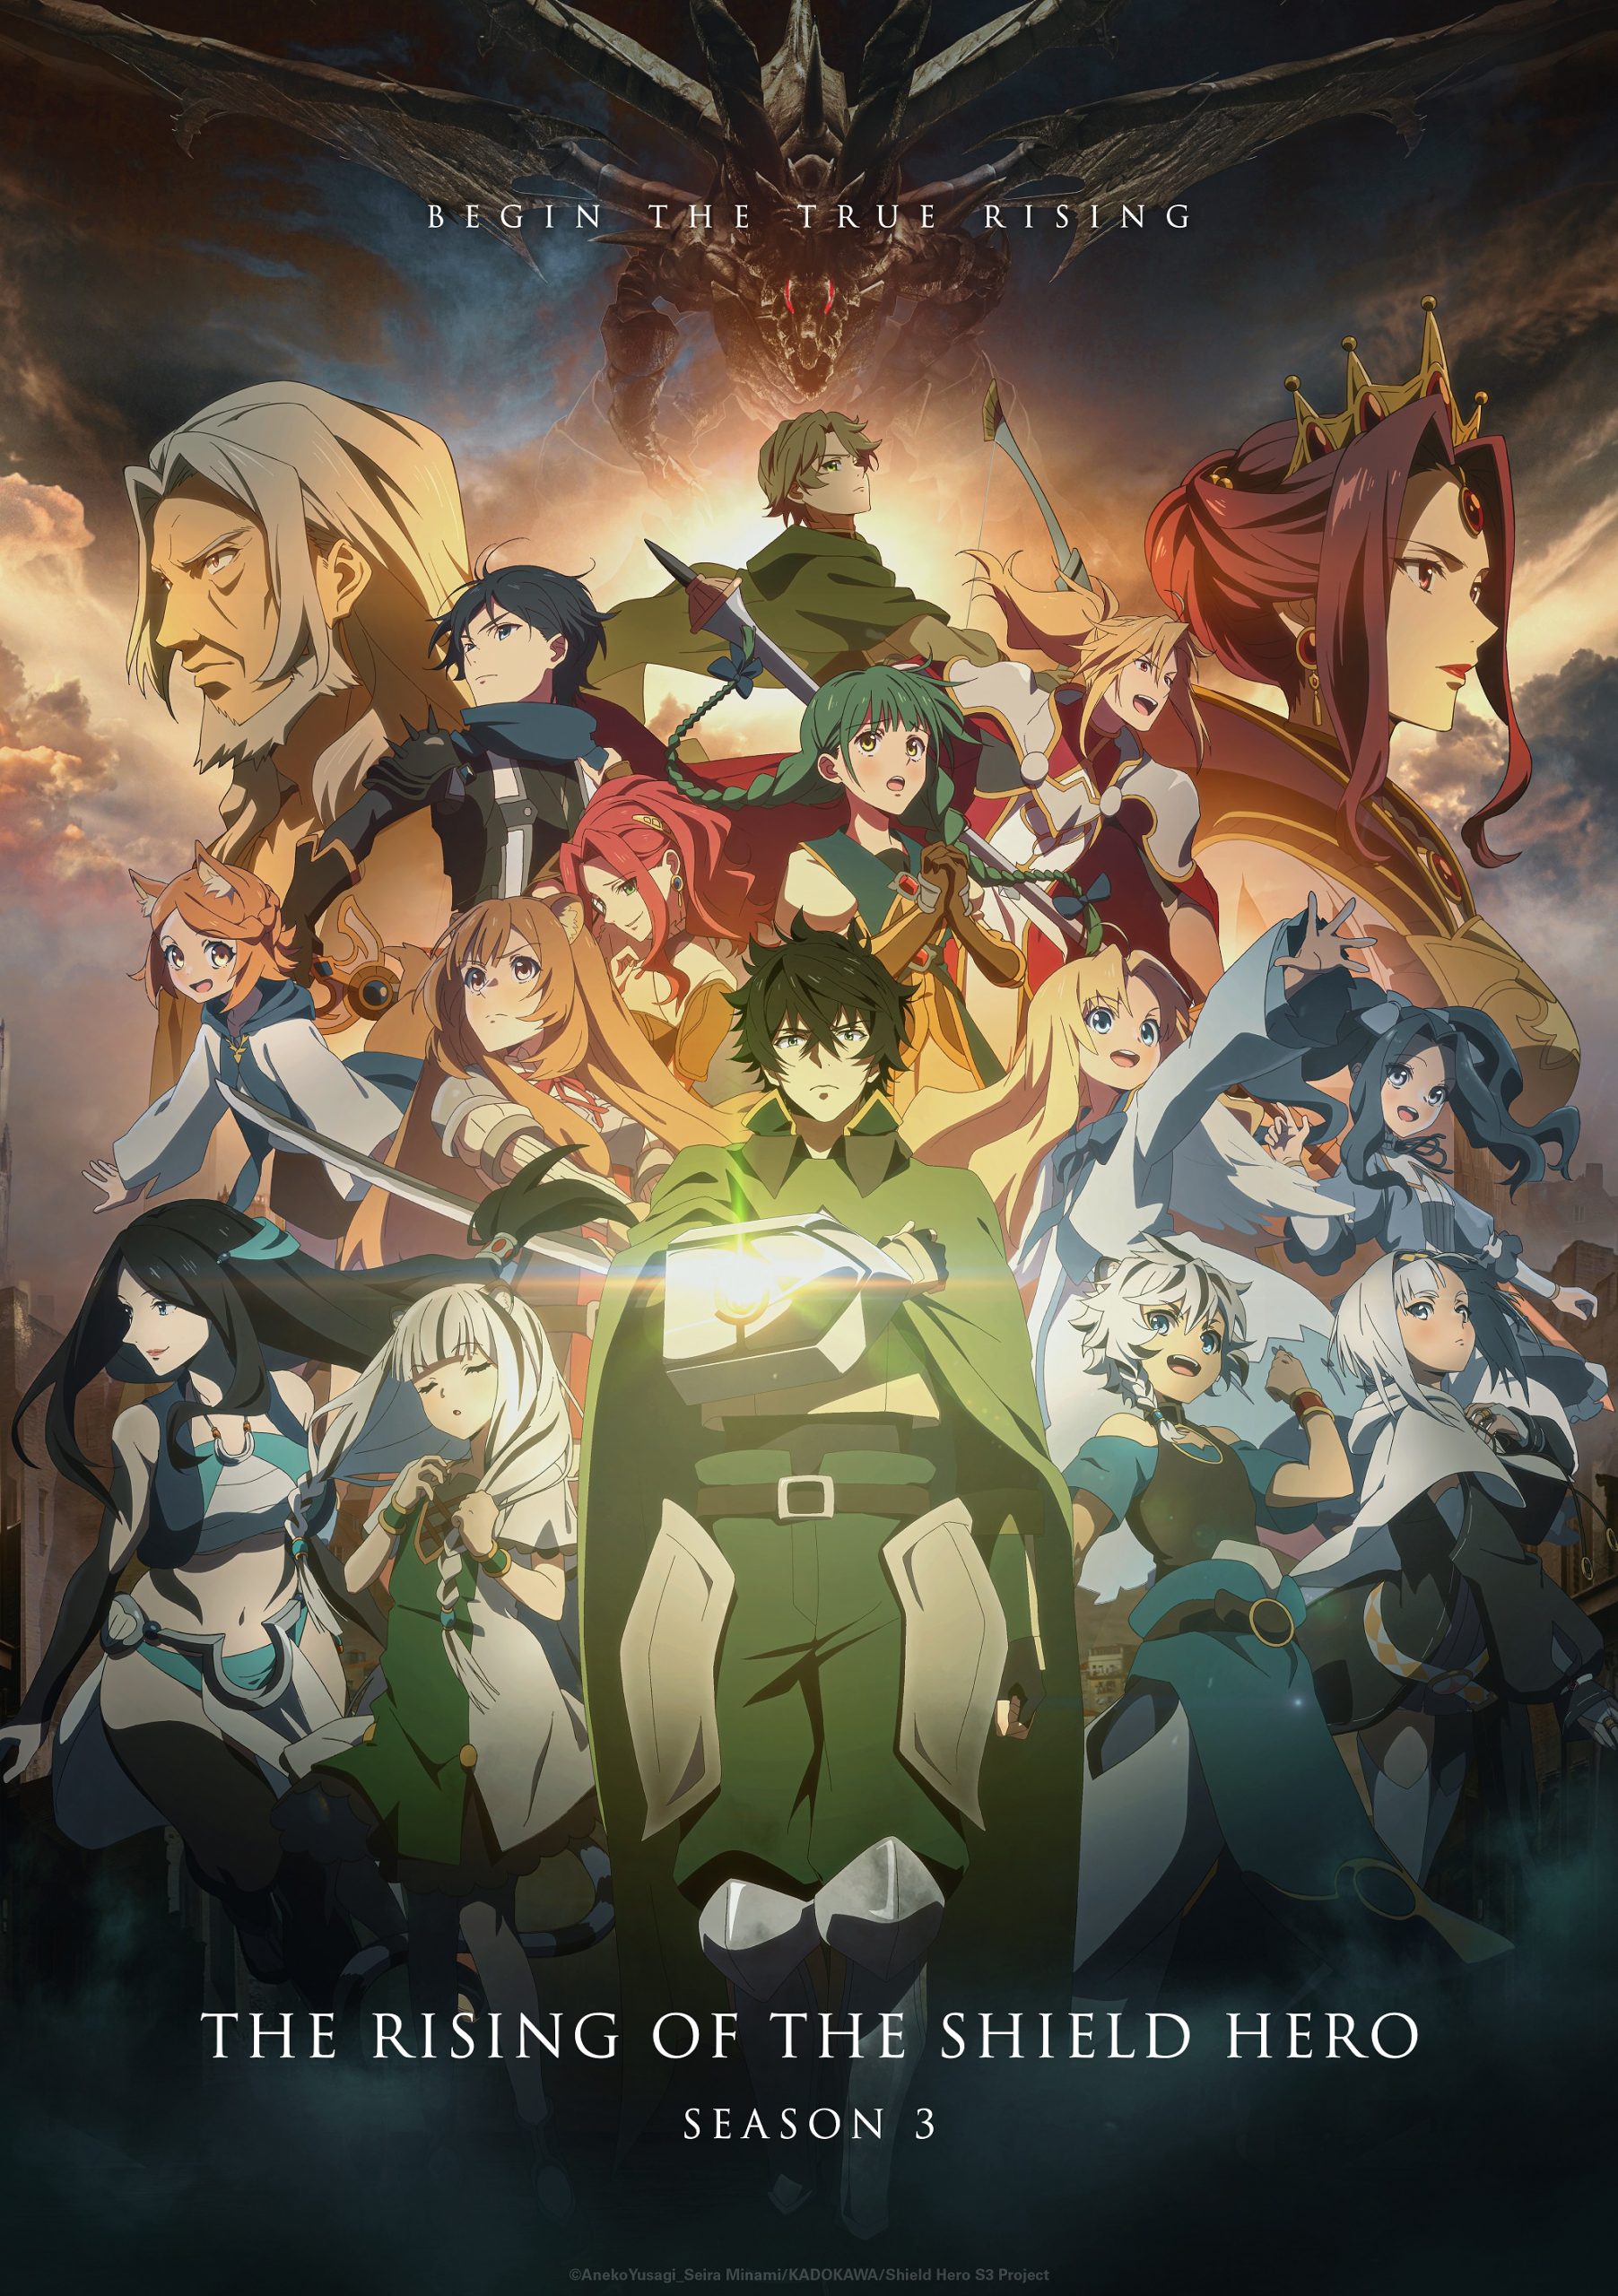 MADKID-Latest-Artist-Photos-scaled MADKID Announced Two OP Themes! For TV Anime “Level 1 Demon Lord and One Room Hero” and for TV Anime “The Rising of the Shield Hero Season 3”